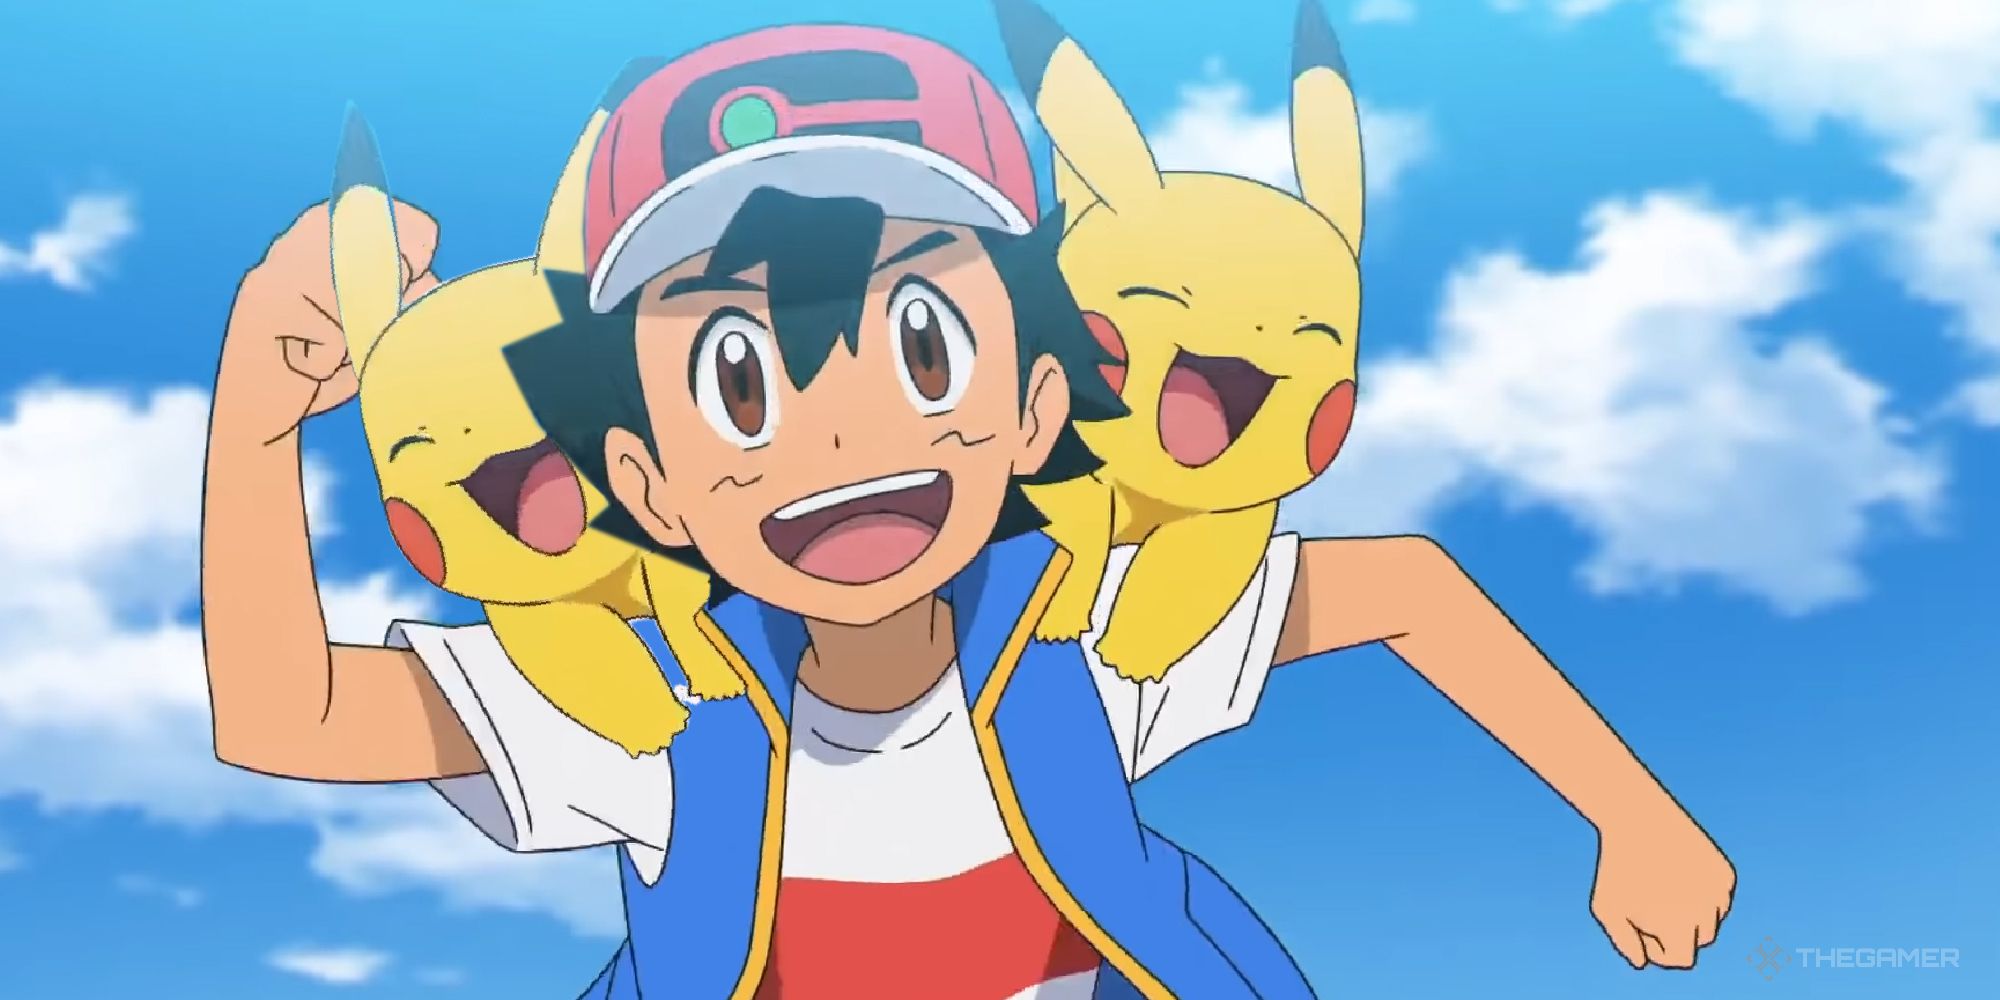 Ash from the anime with two Pikachu